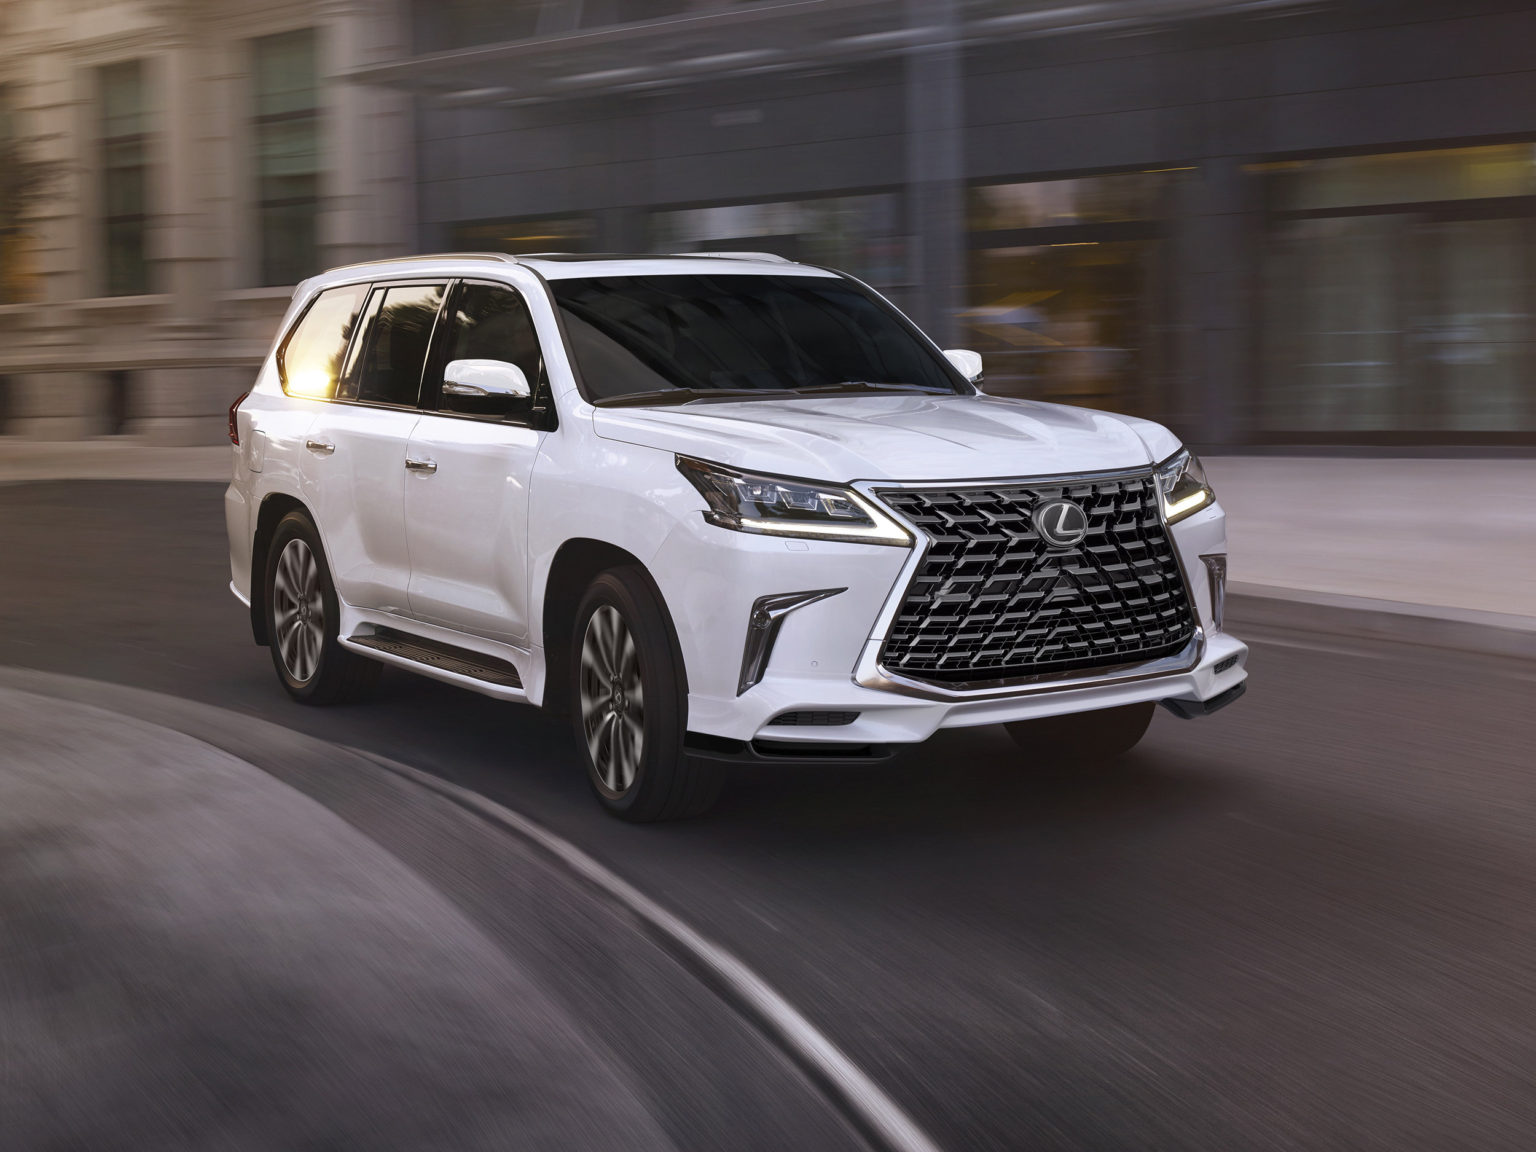 The LX 570 will be a part of the Lexus lineup for at least one more year and it's getting some improvements.